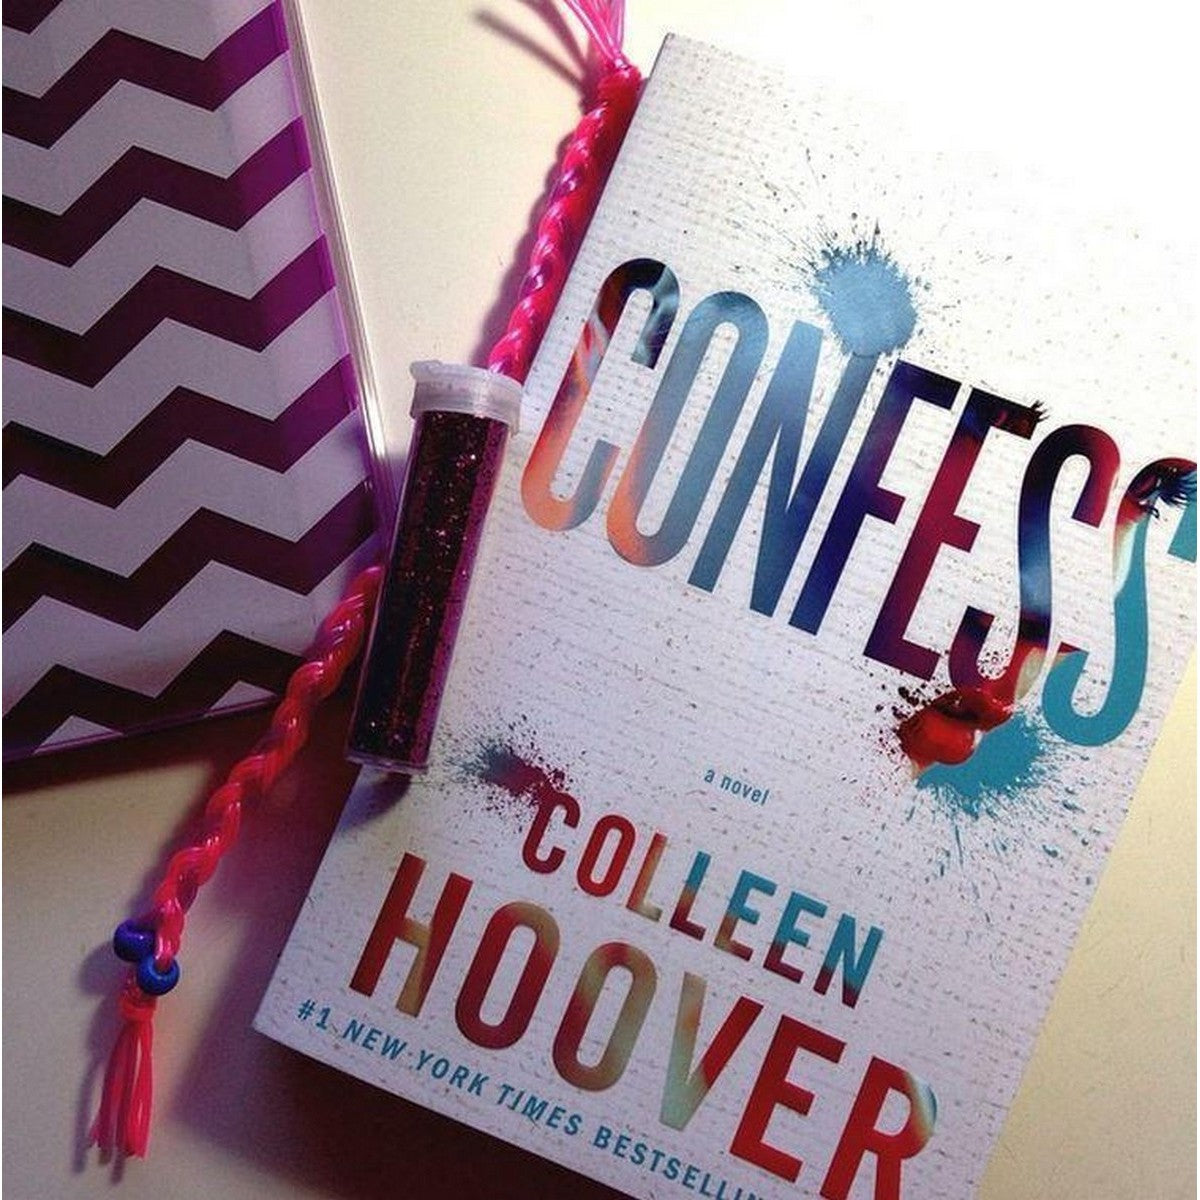 Confess by Colleen Hoover (book)